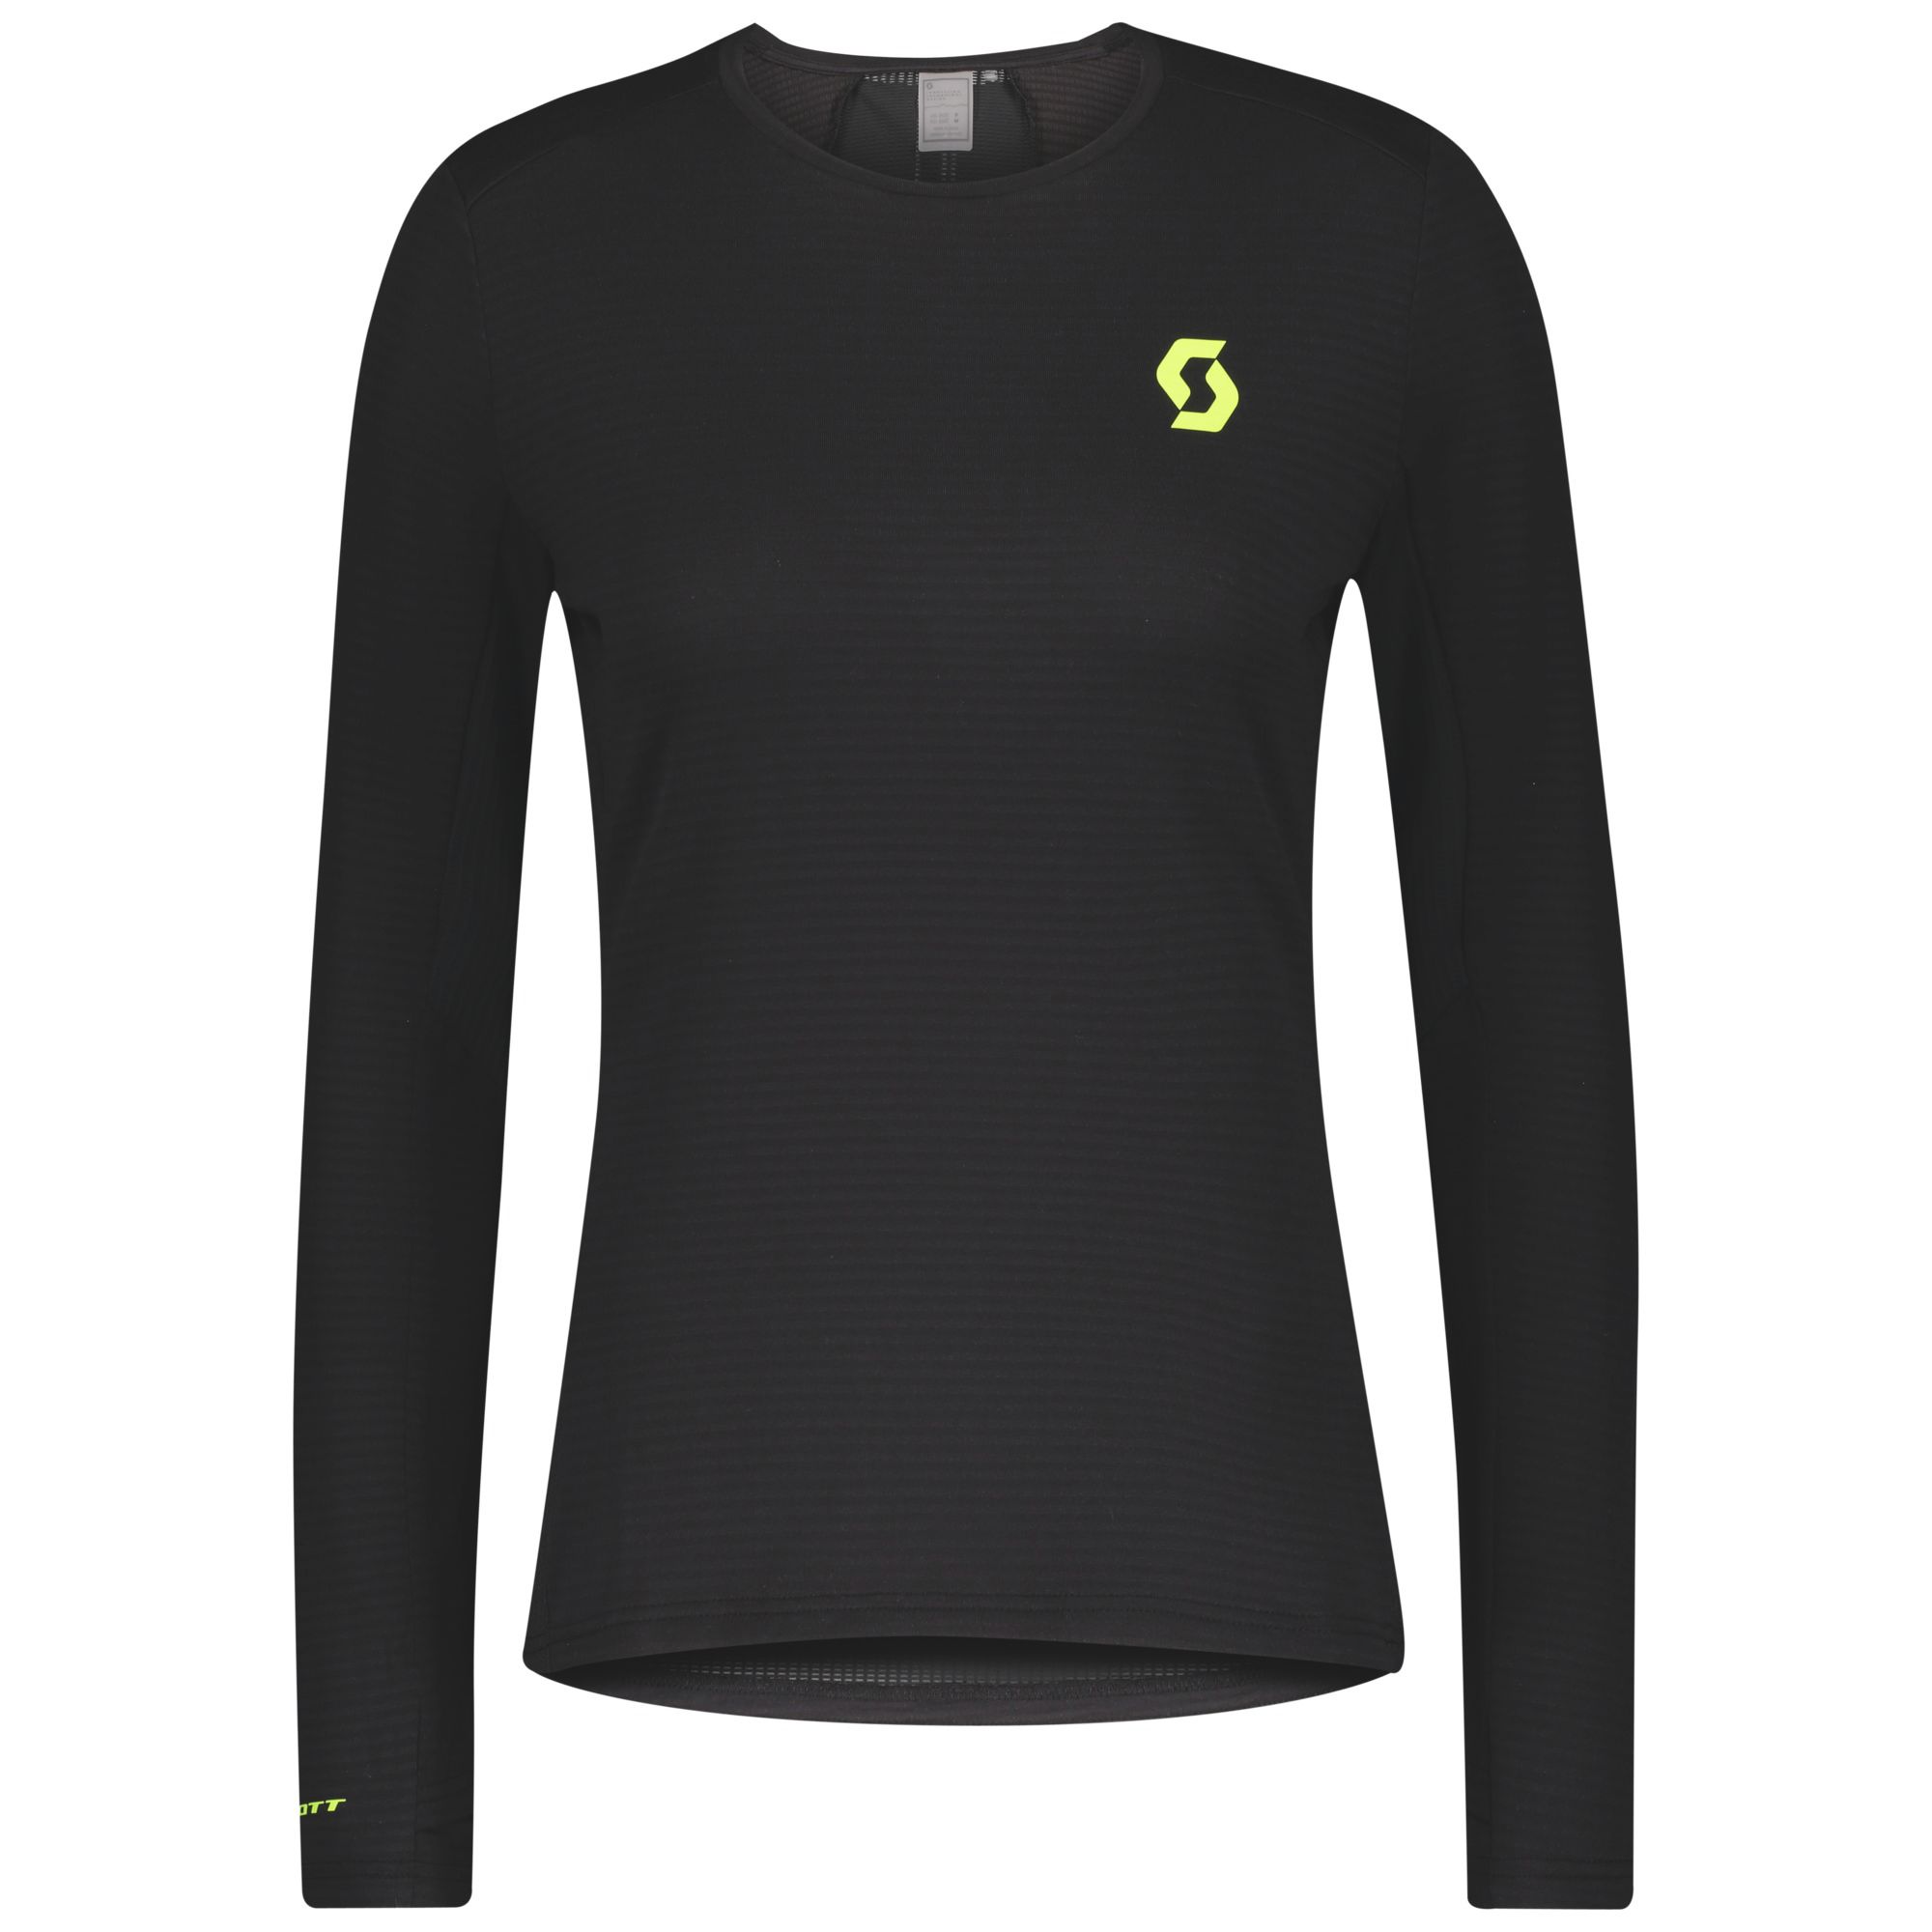 Maillot de trail running homme TR top pro 2 manches longues